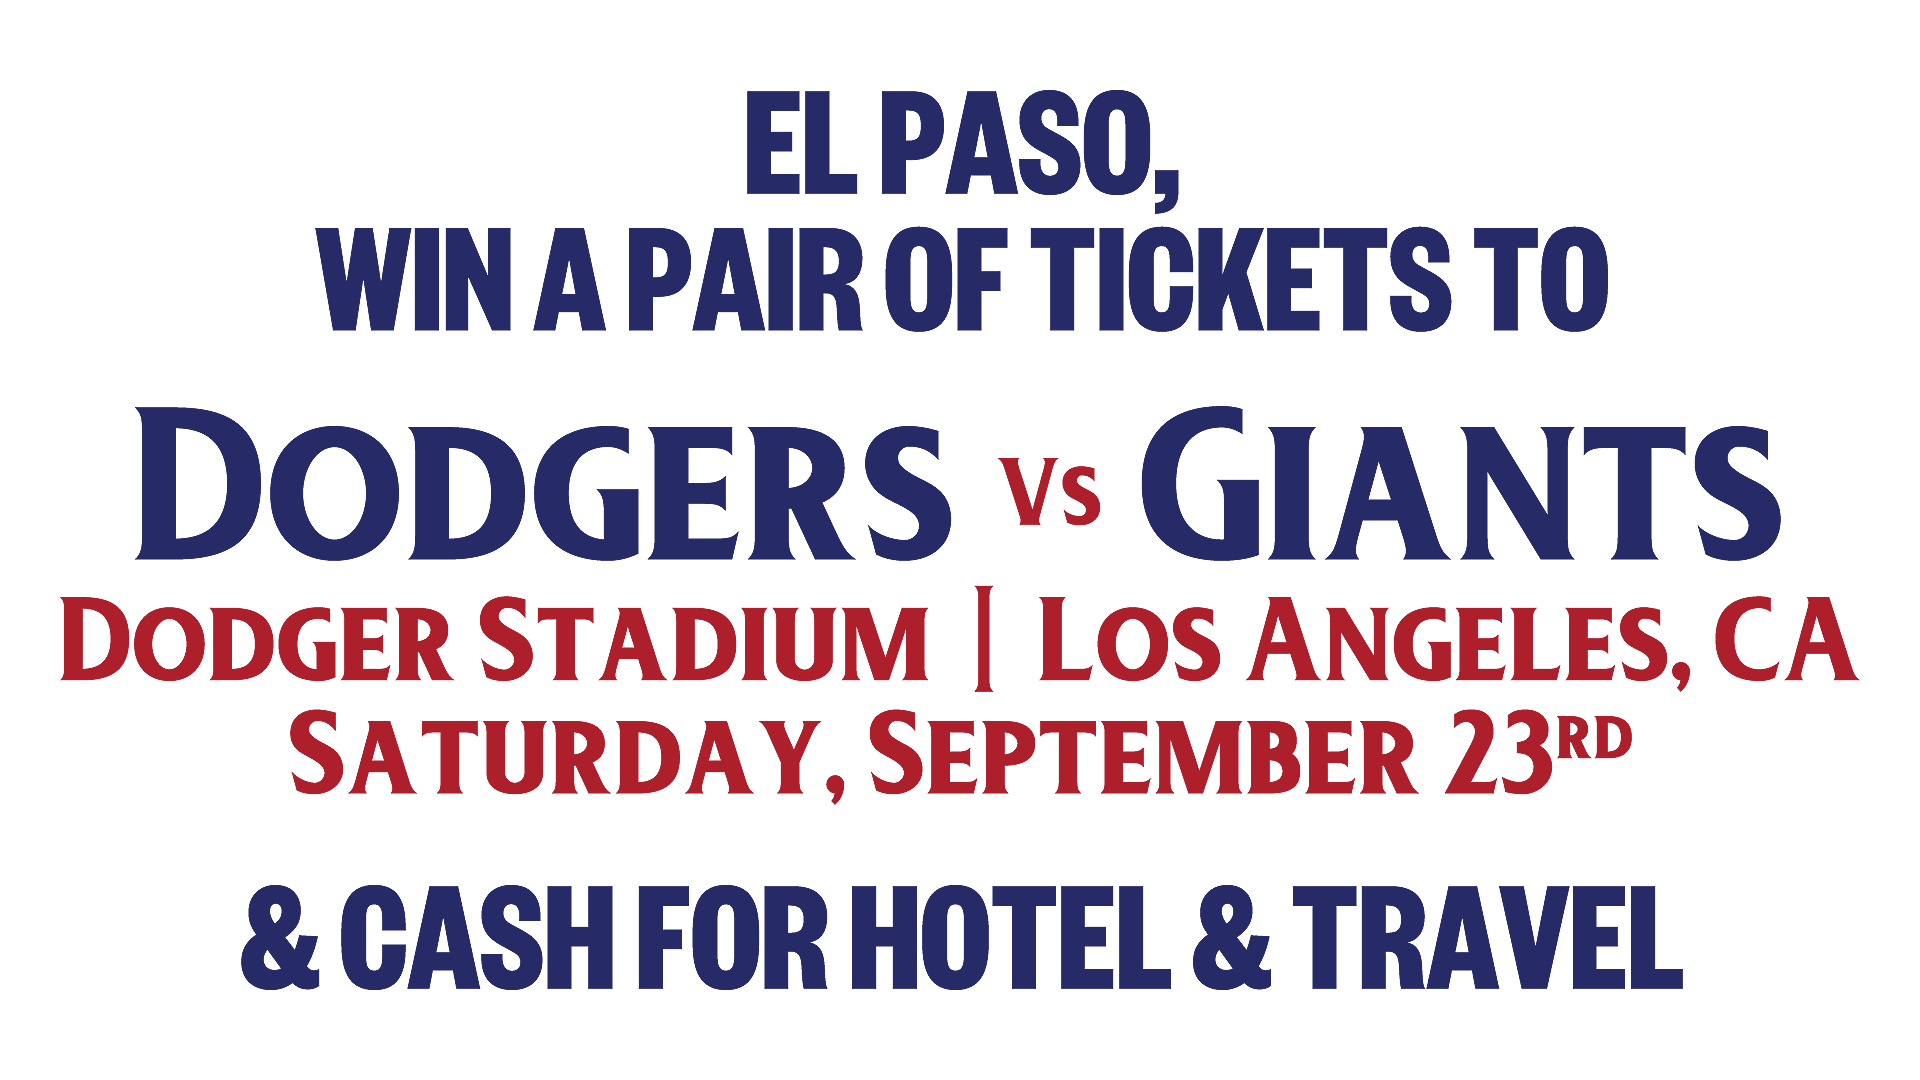 Here's How You Can Win a Trip to LA for a Dodgers Game